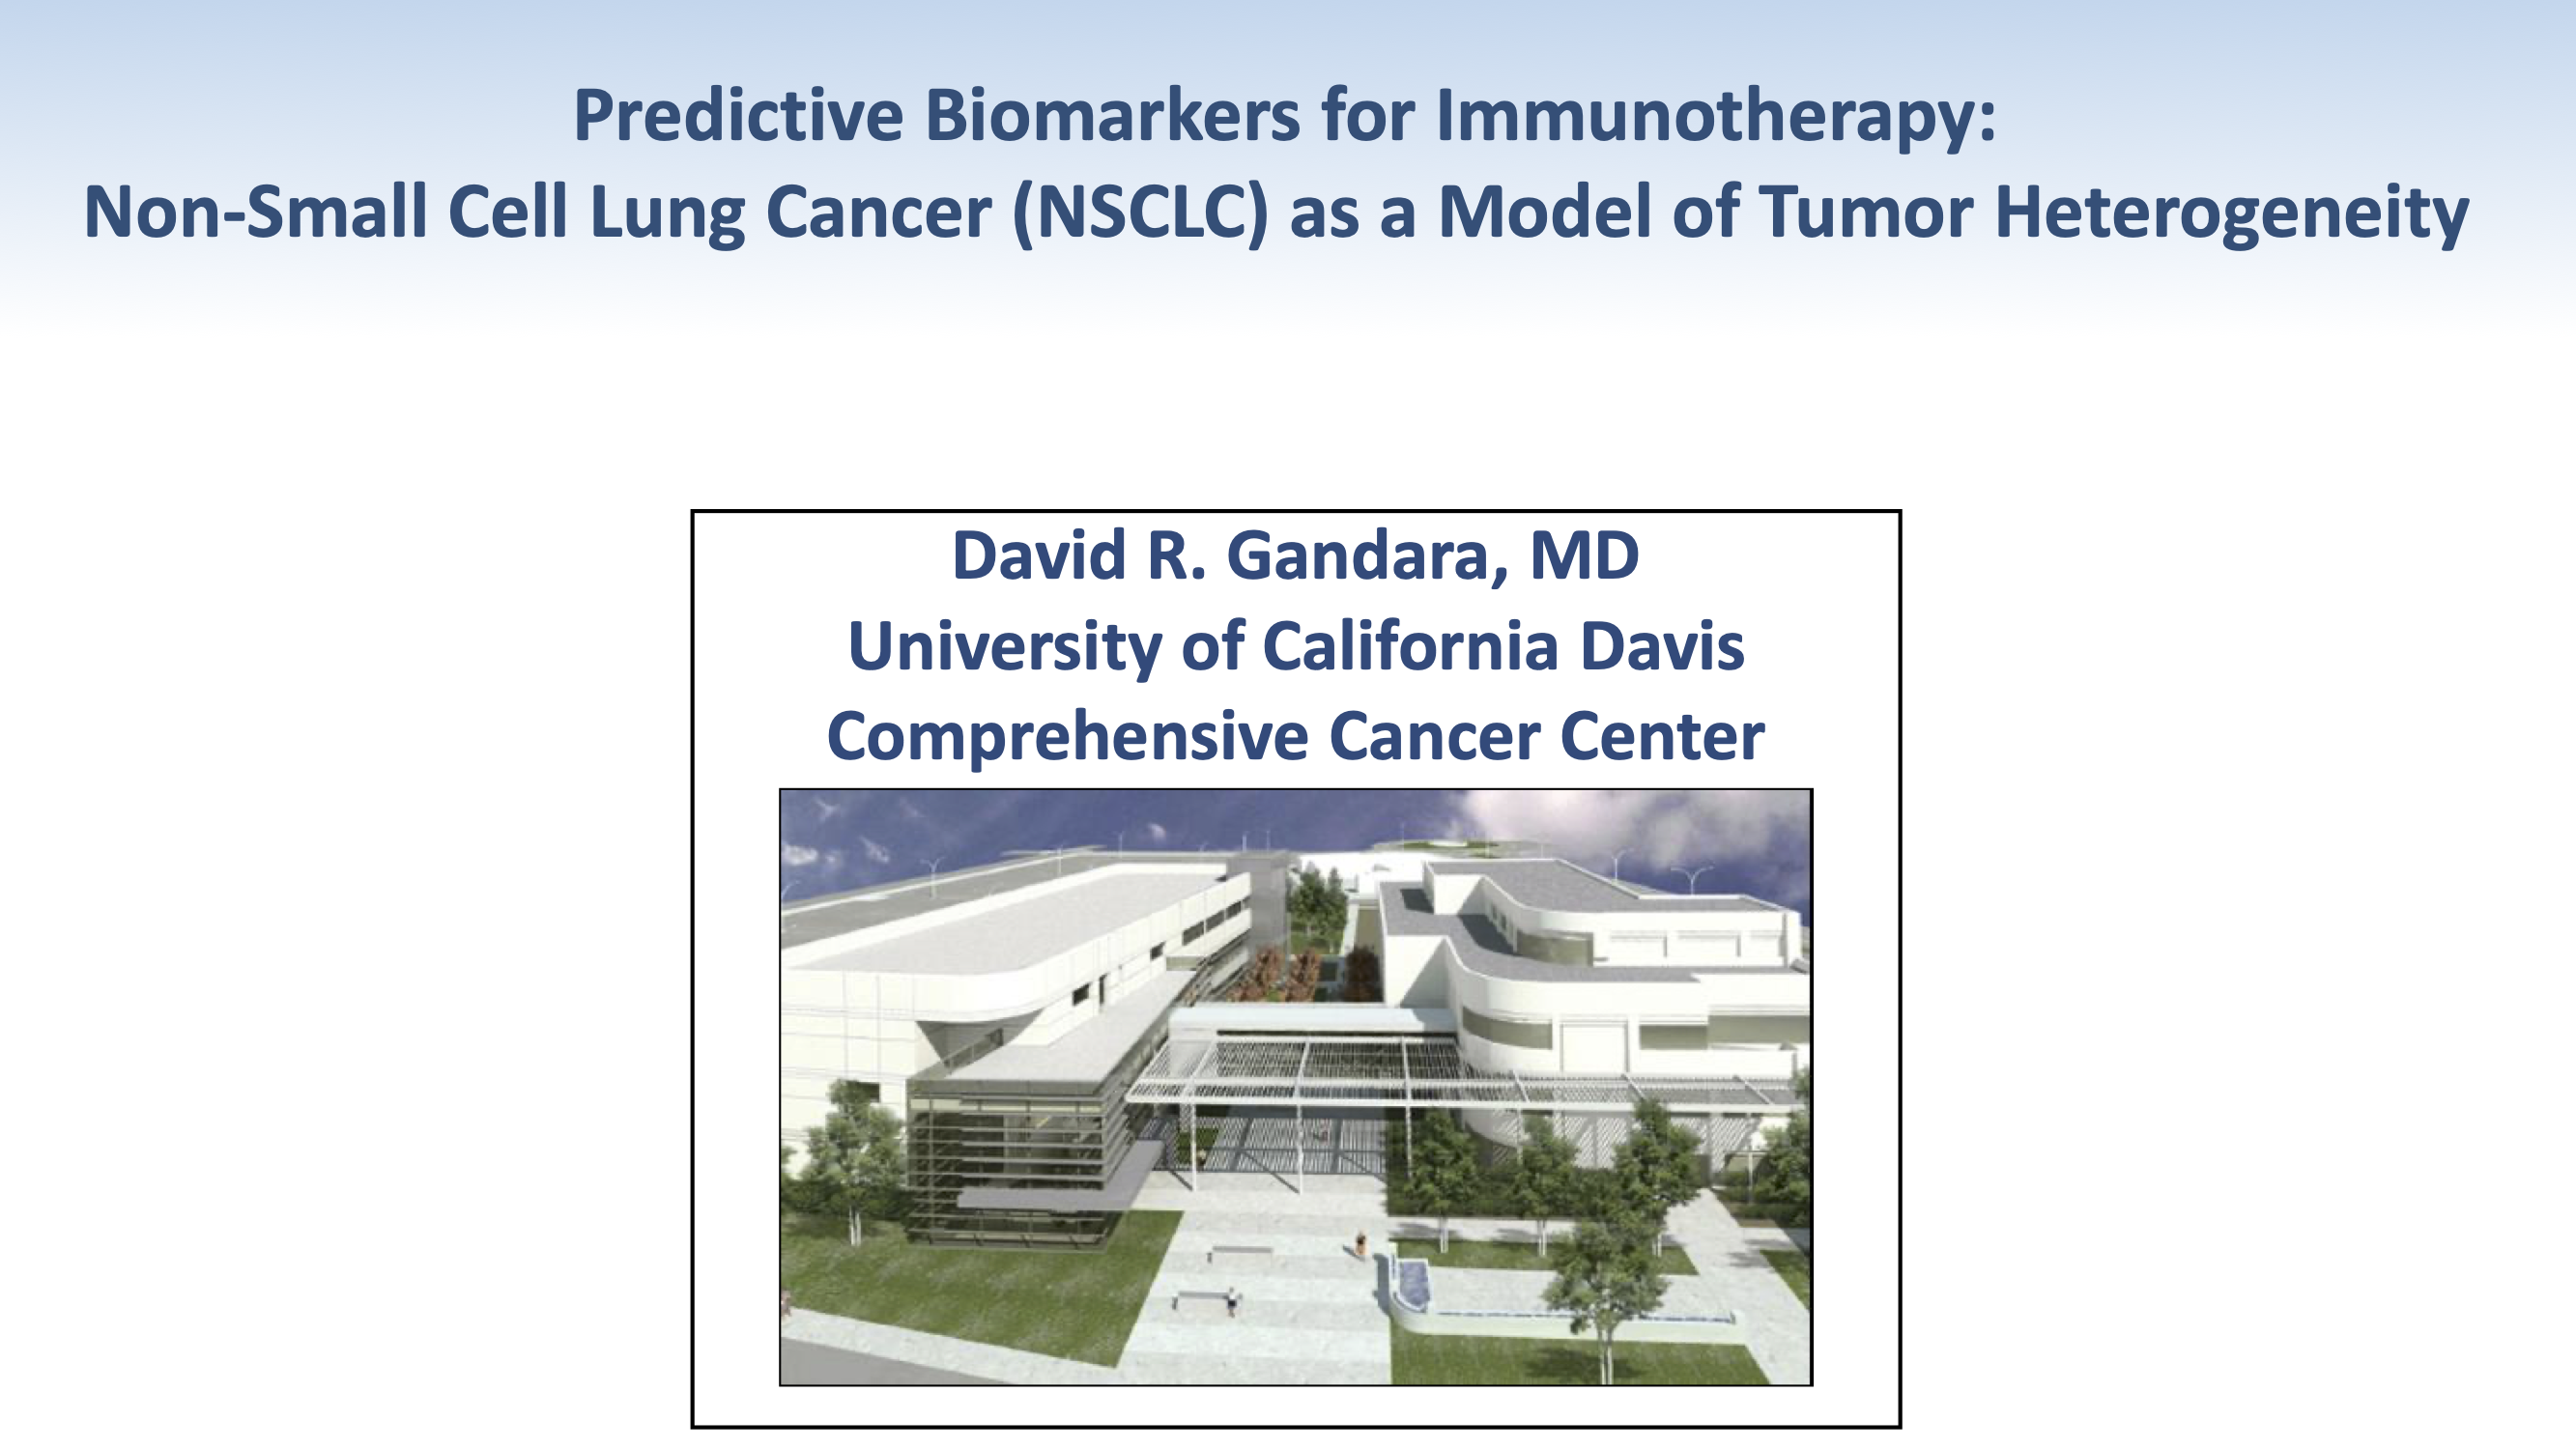 Predictive Biomarkers for Immunotherapy - Non-Small Cell Lung Cancer (NSCLC) as a Model of Tumor Heterogeneity